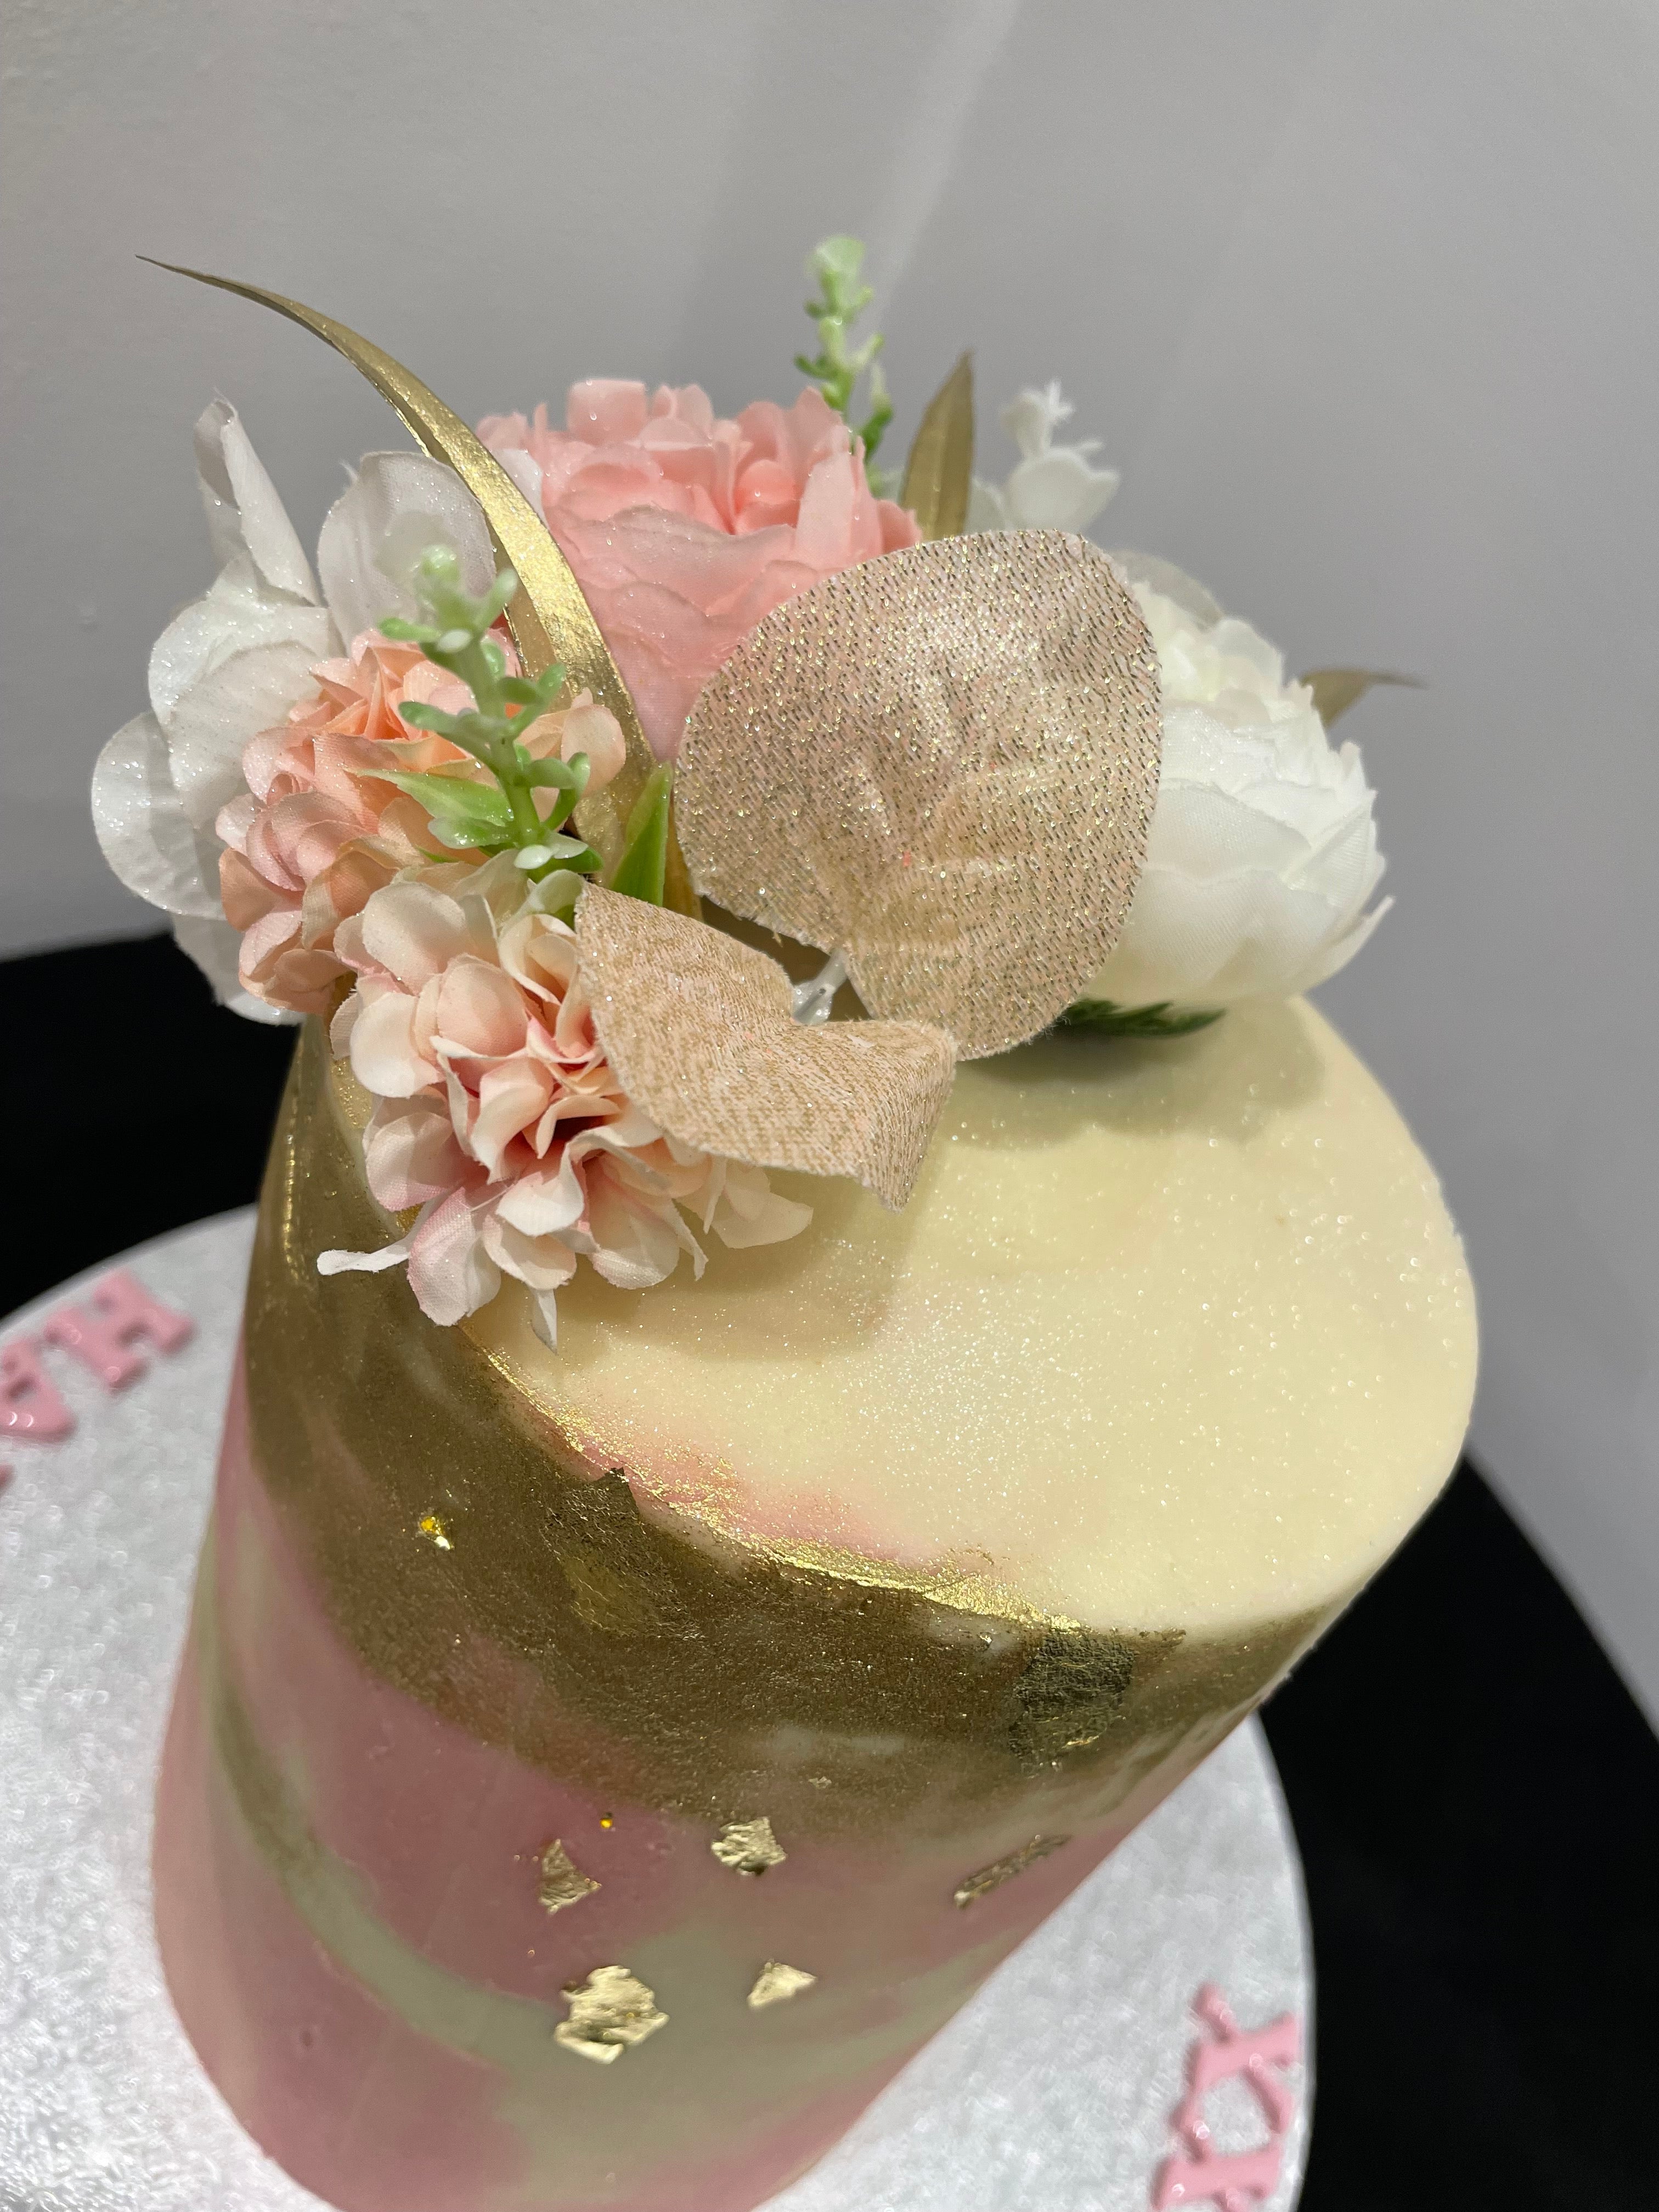 ARTY GOLD & PINK OCCASION CAKE